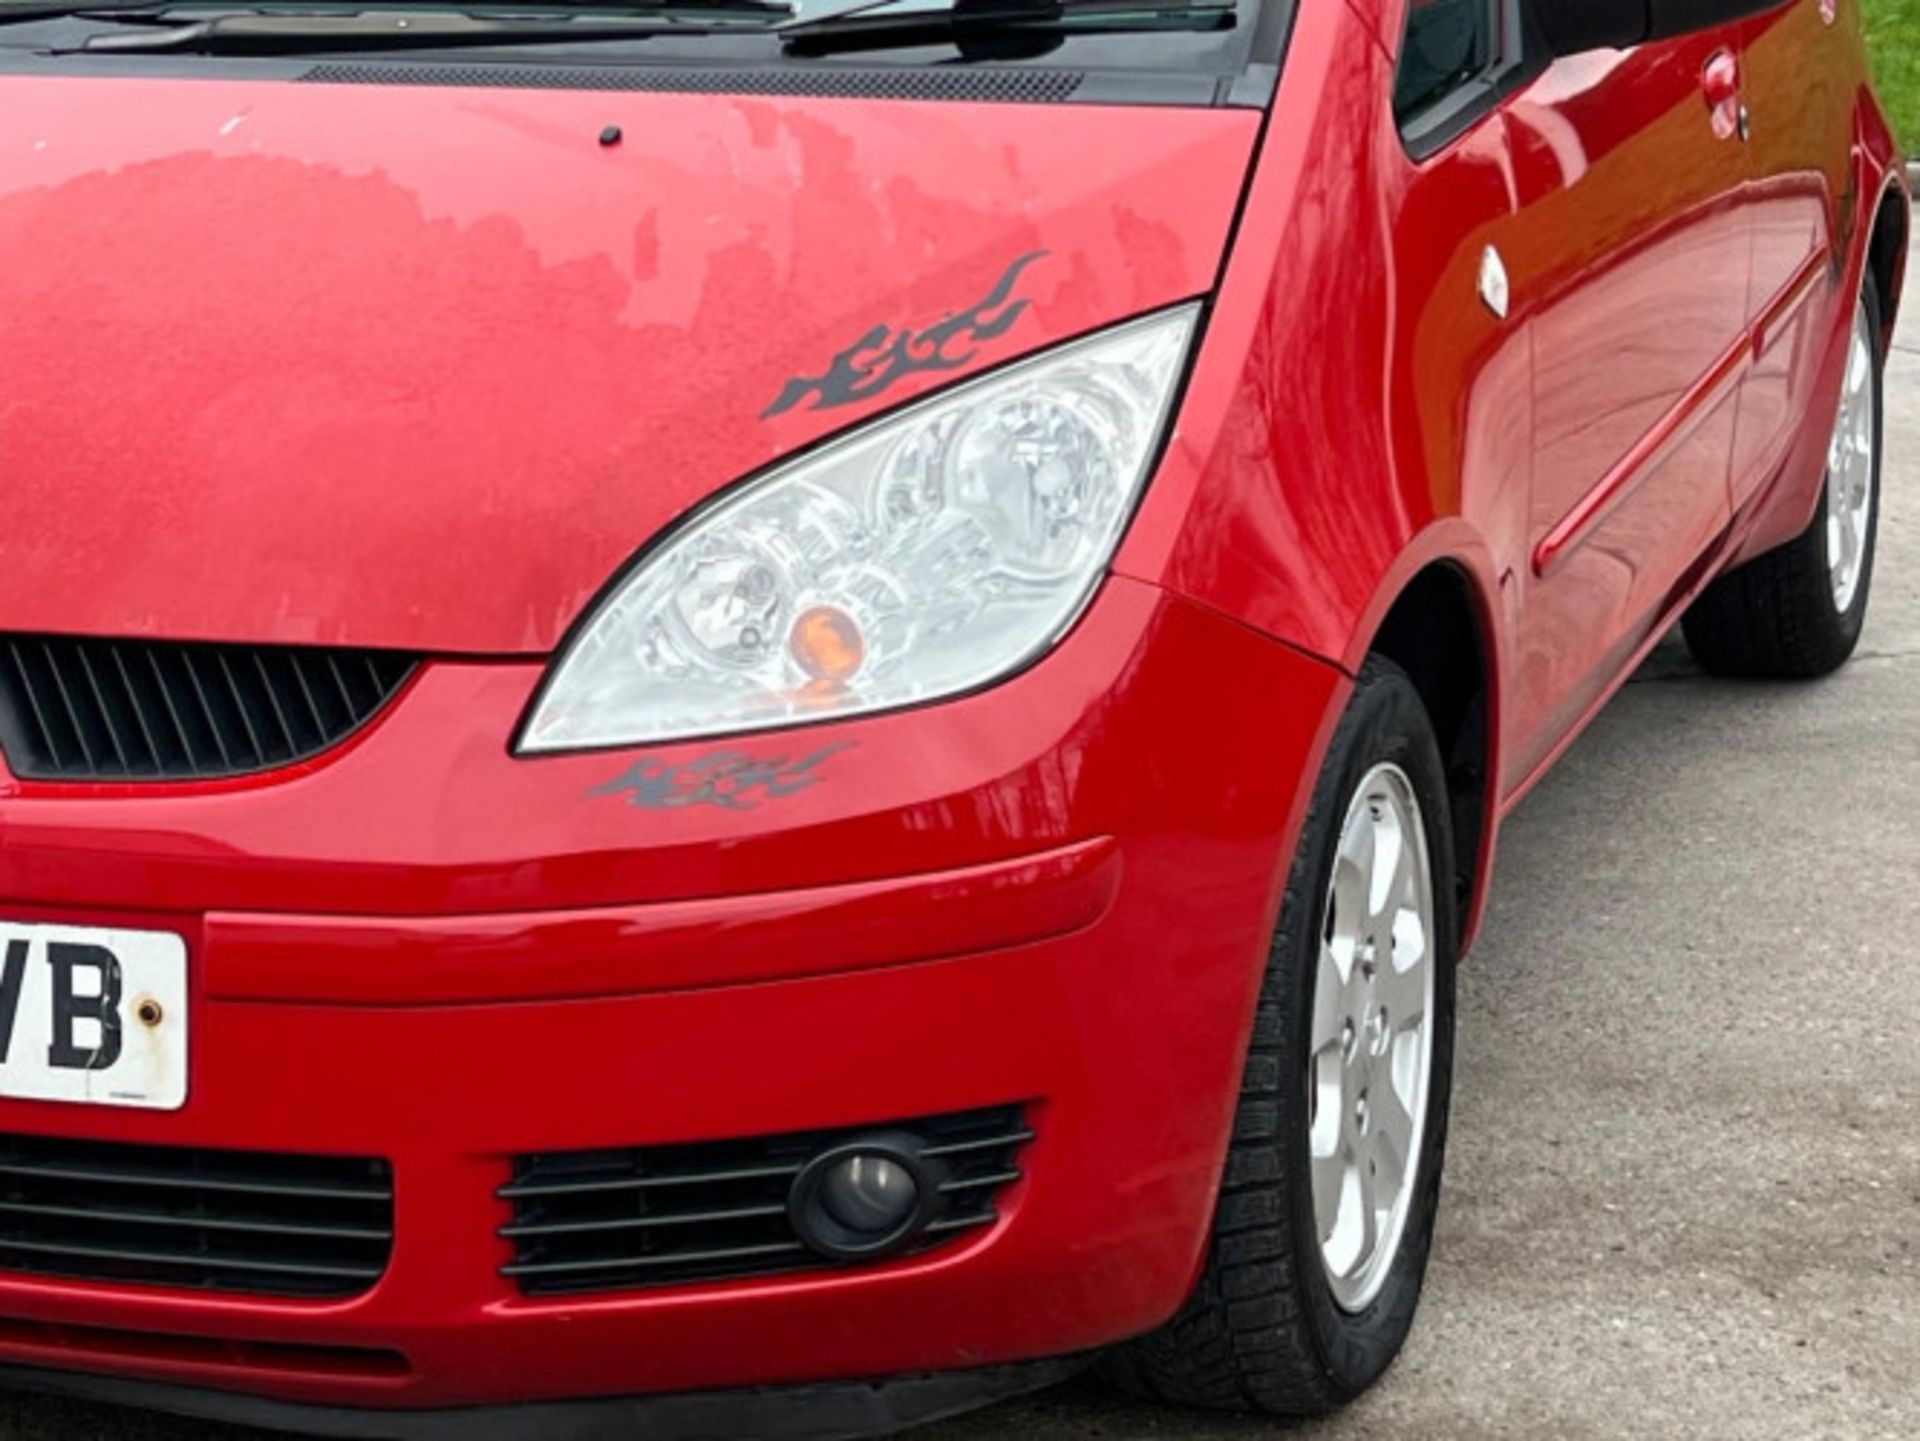 2007 MITSUBISHI COLT 1.5 DI-D DIESEL AUTOMATIC >>--NO VAT ON HAMMER--<< - Image 113 of 127